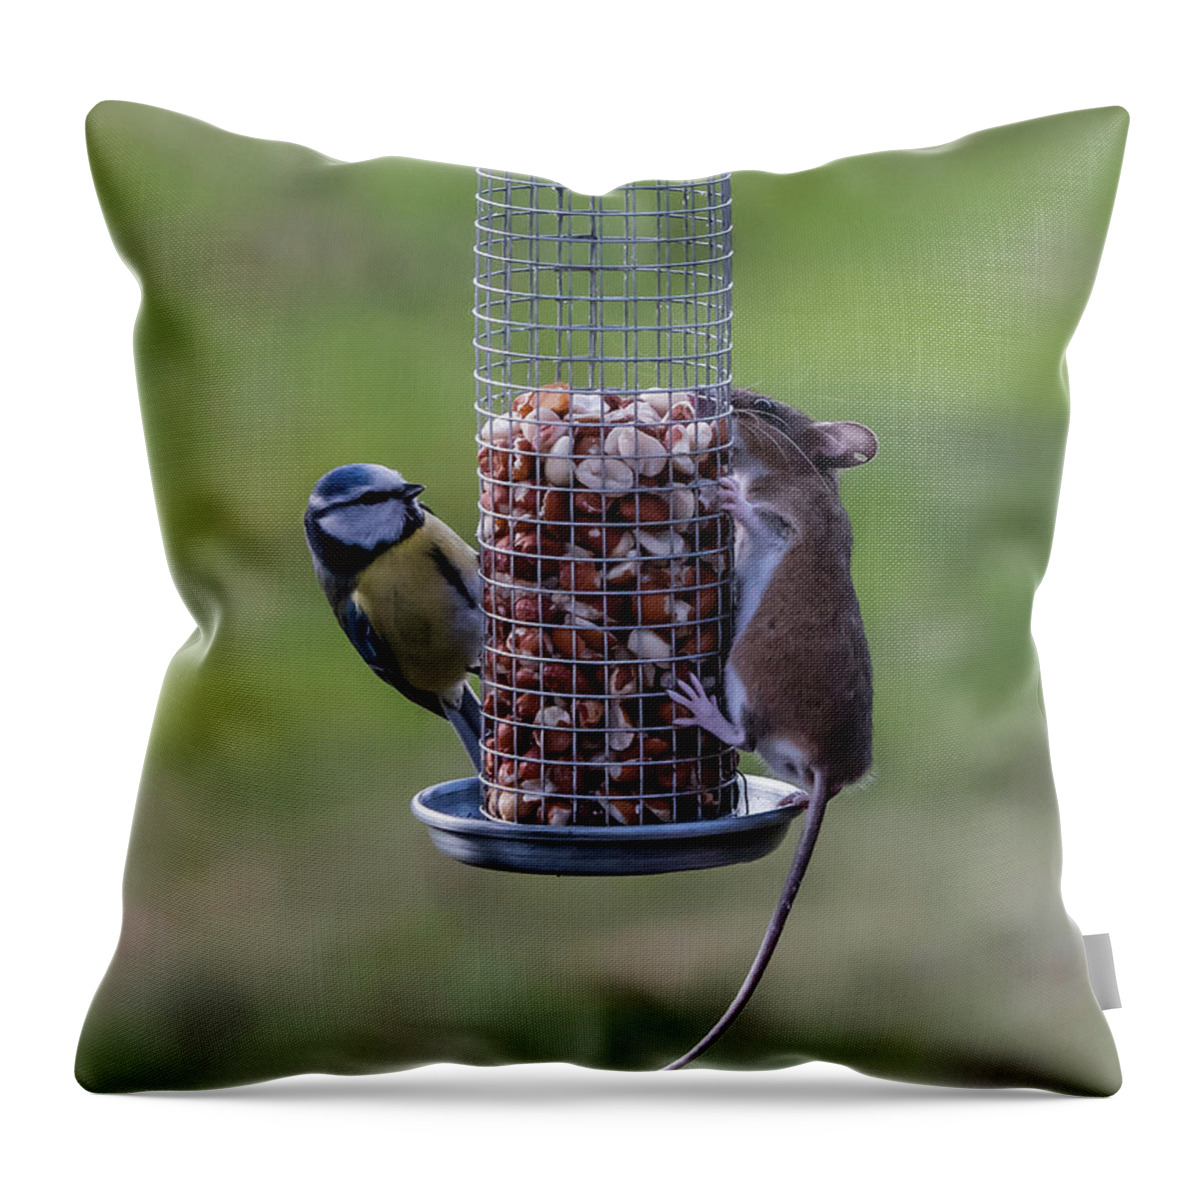 Bird Throw Pillow featuring the photograph The Bird and Mice Feeder by Torbjorn Swenelius